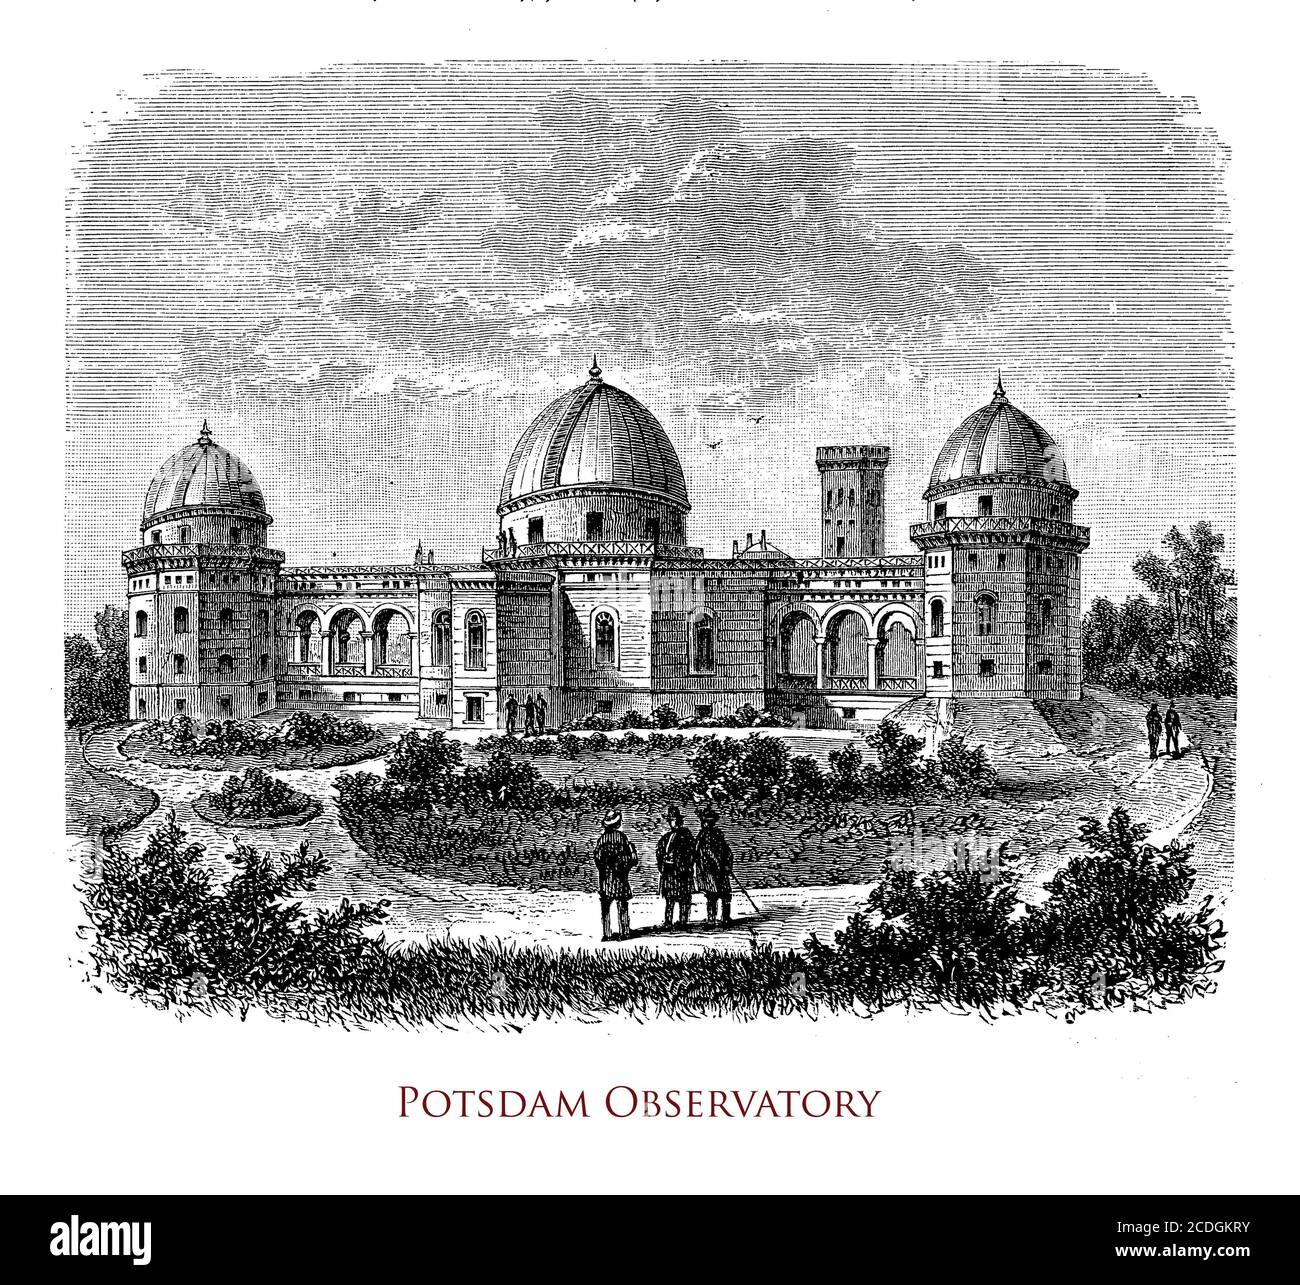 Prussia, Astrophysical Observatory Potsdam with the three characteristic domes founded in 1874 on the Telegrafenberg to research astrophysics, from stellar physics to cosmology Stock Photo